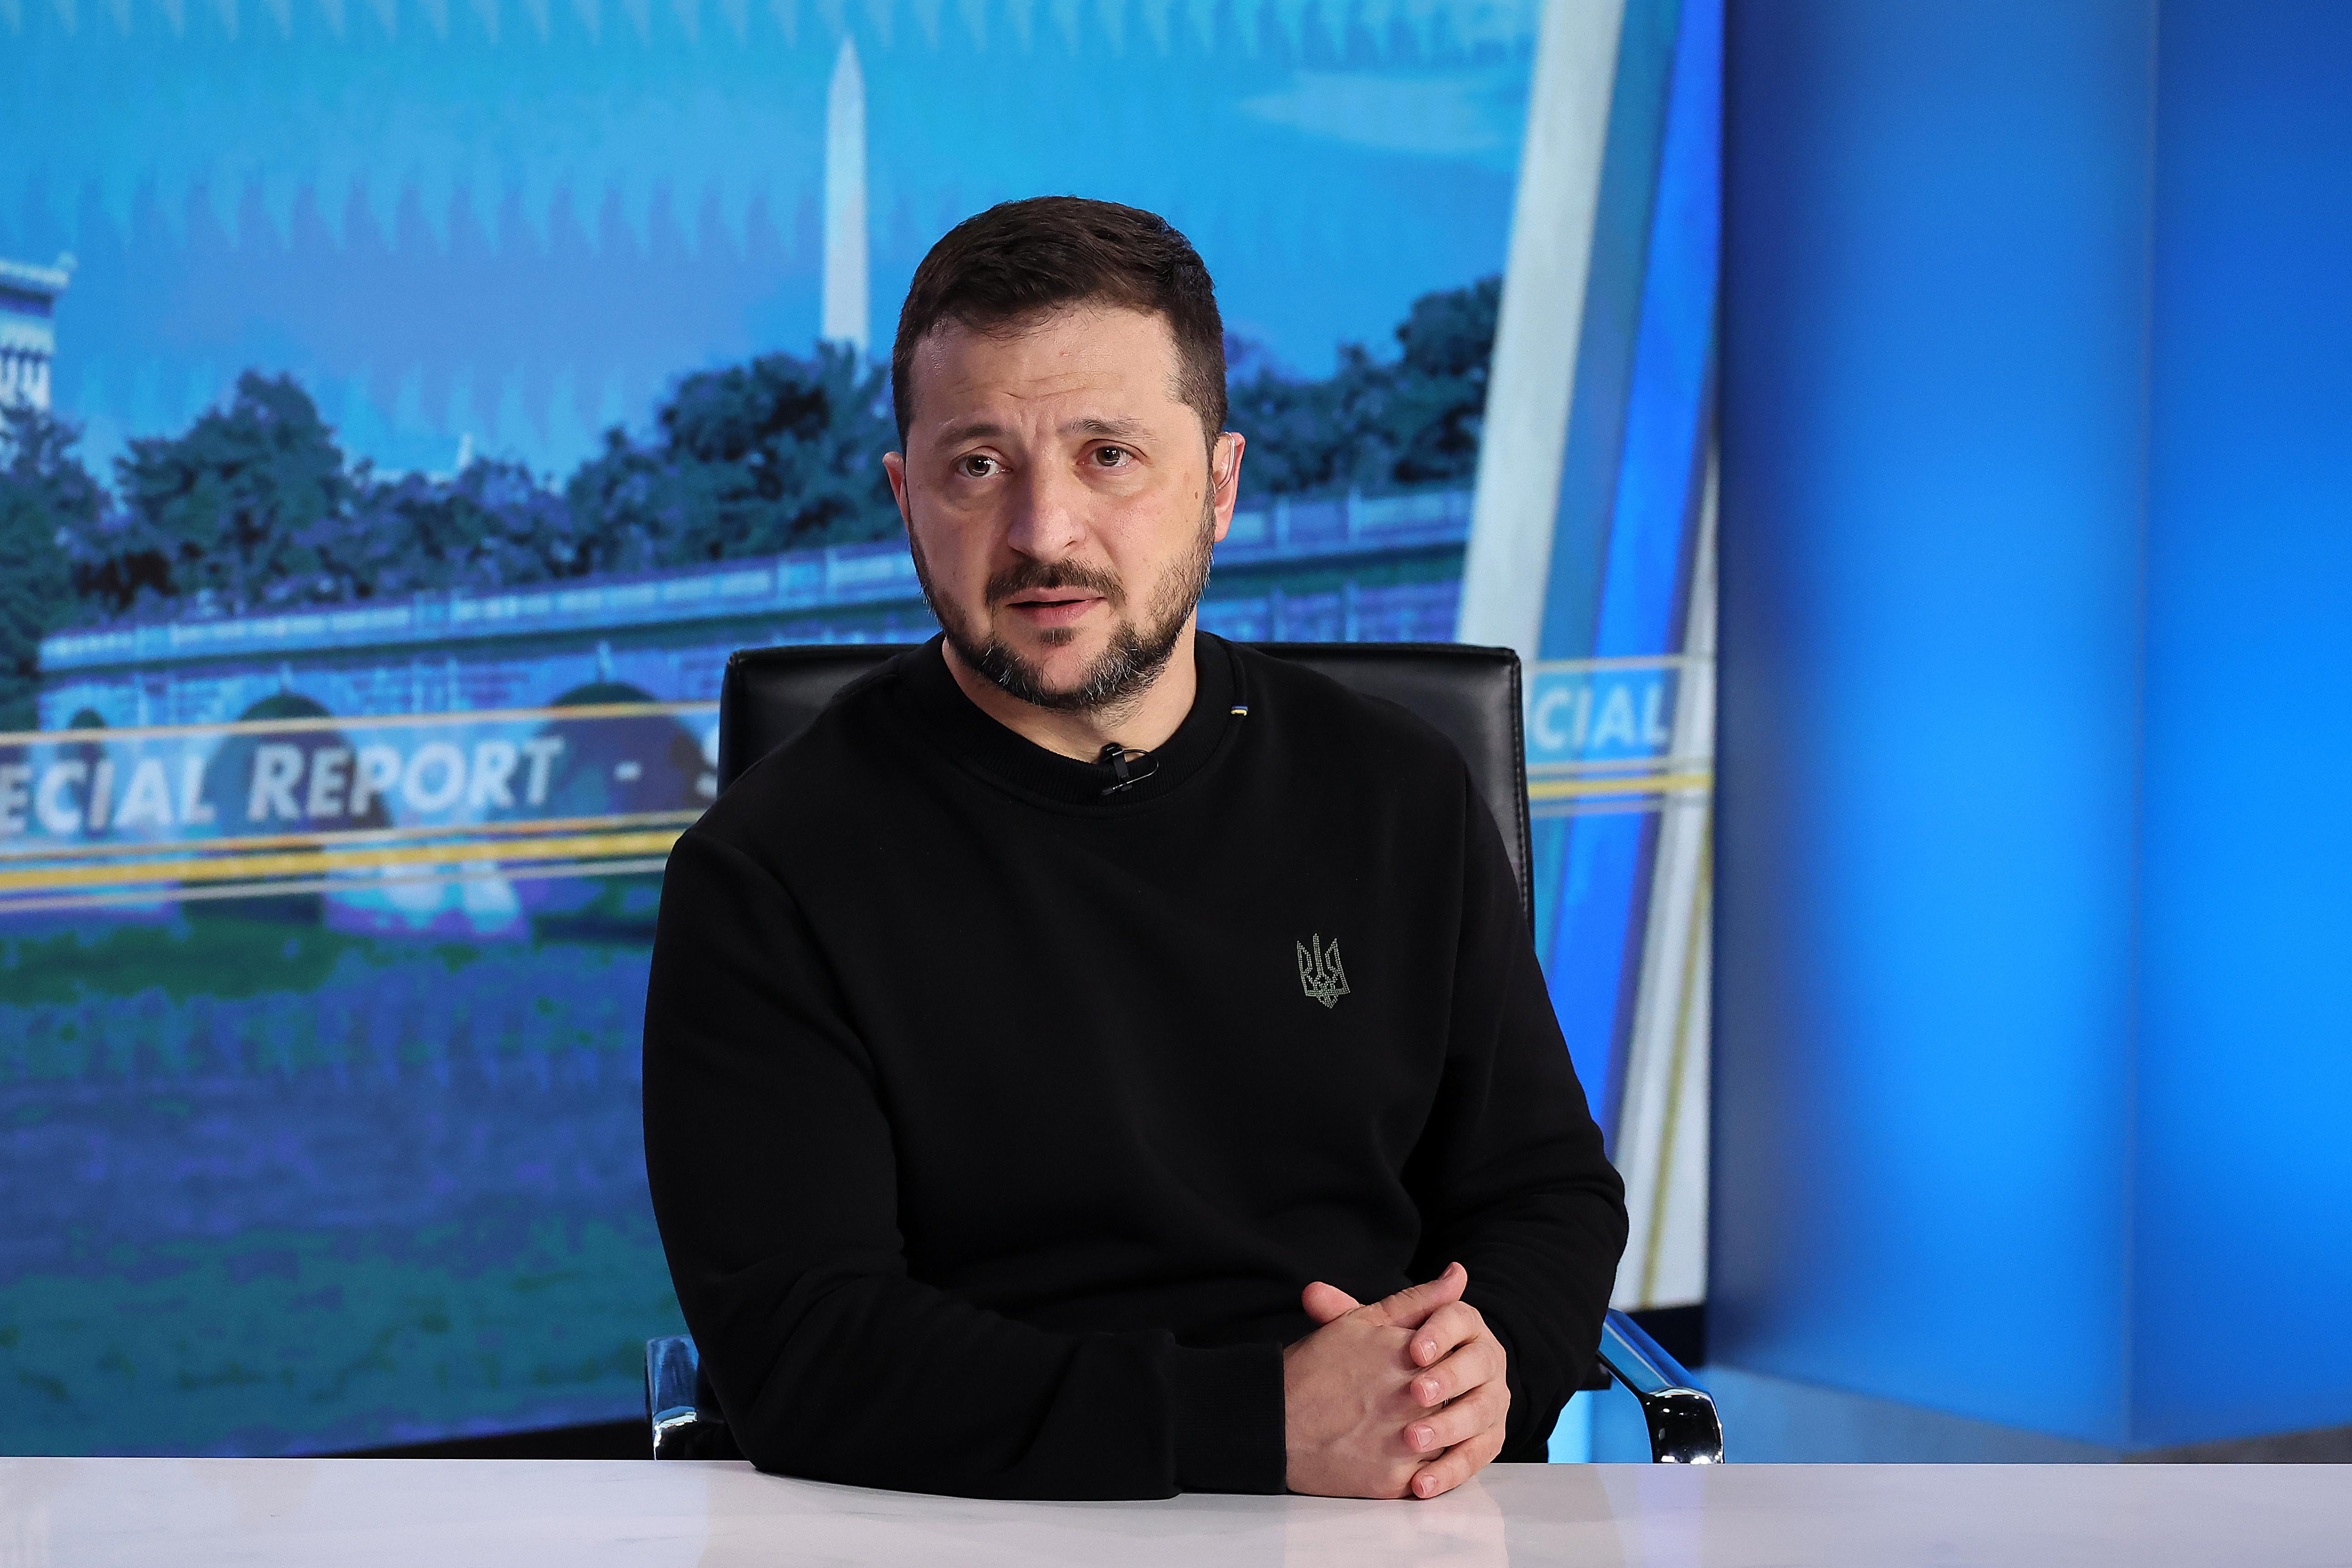 Zelensky on the set of a TV news show in D.C. with the Washington Monument on a screen behind him.